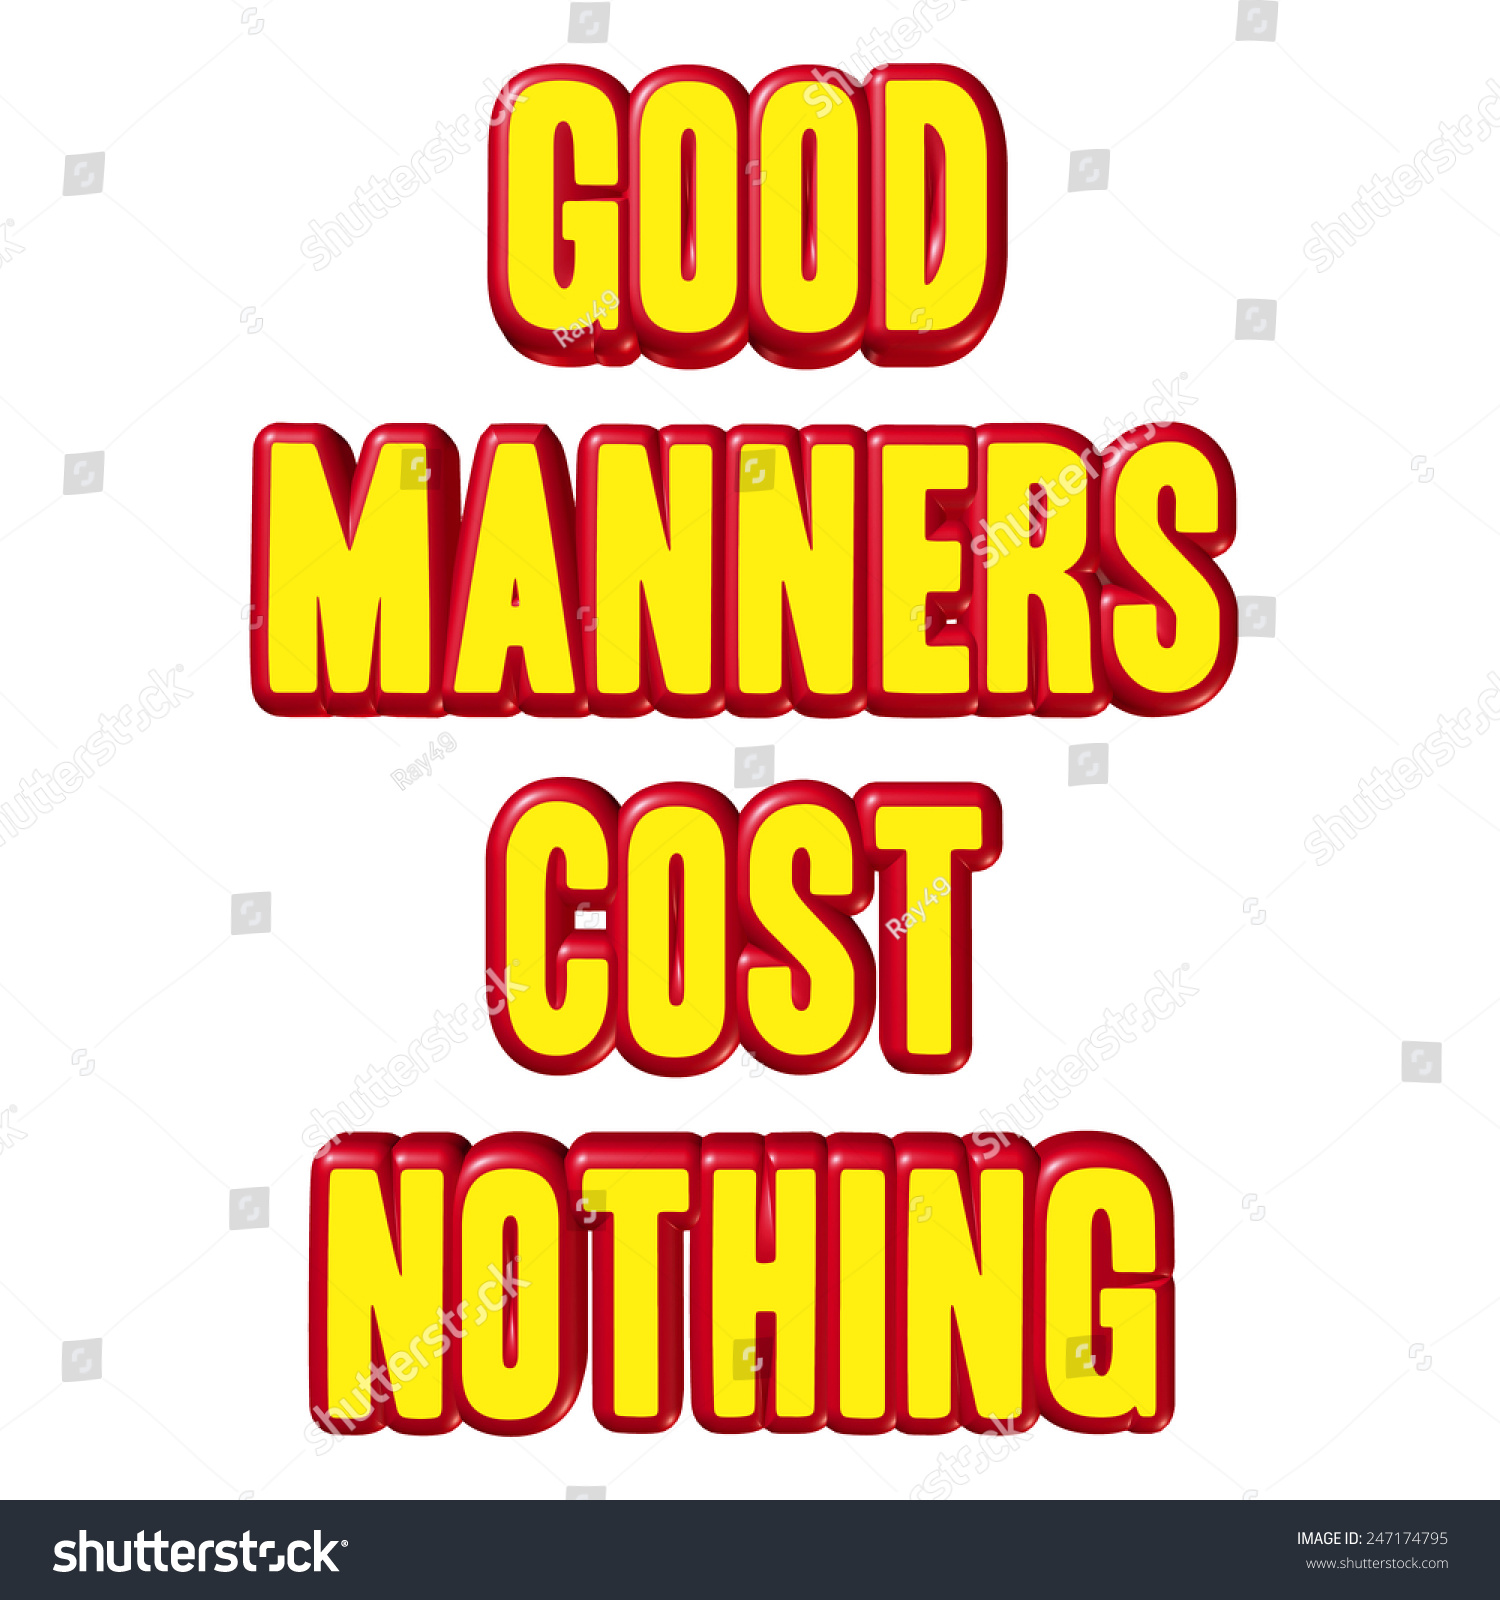 clipart on good manners - photo #25